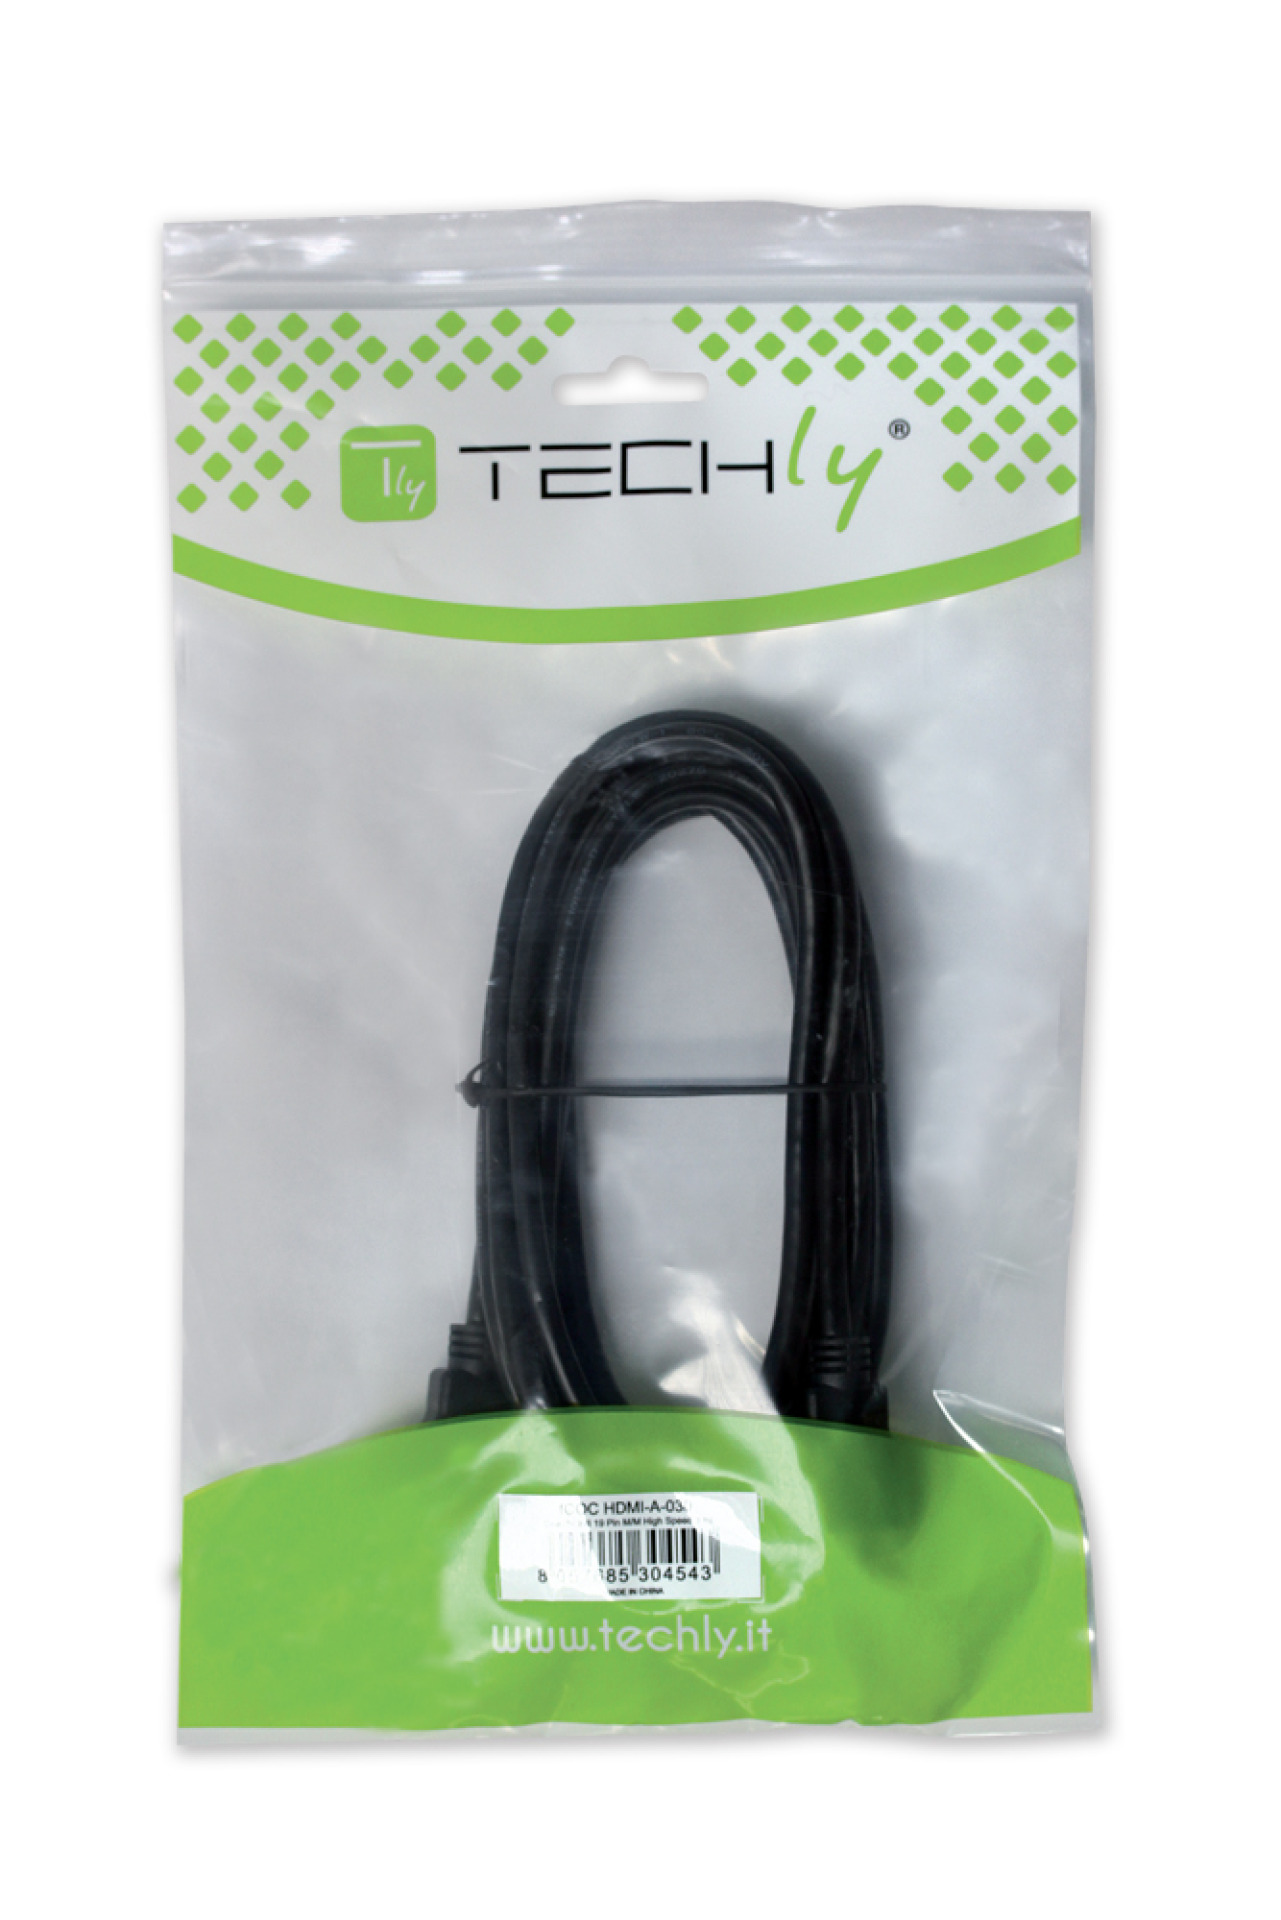 HDMI Cable with Ferrite 5m long